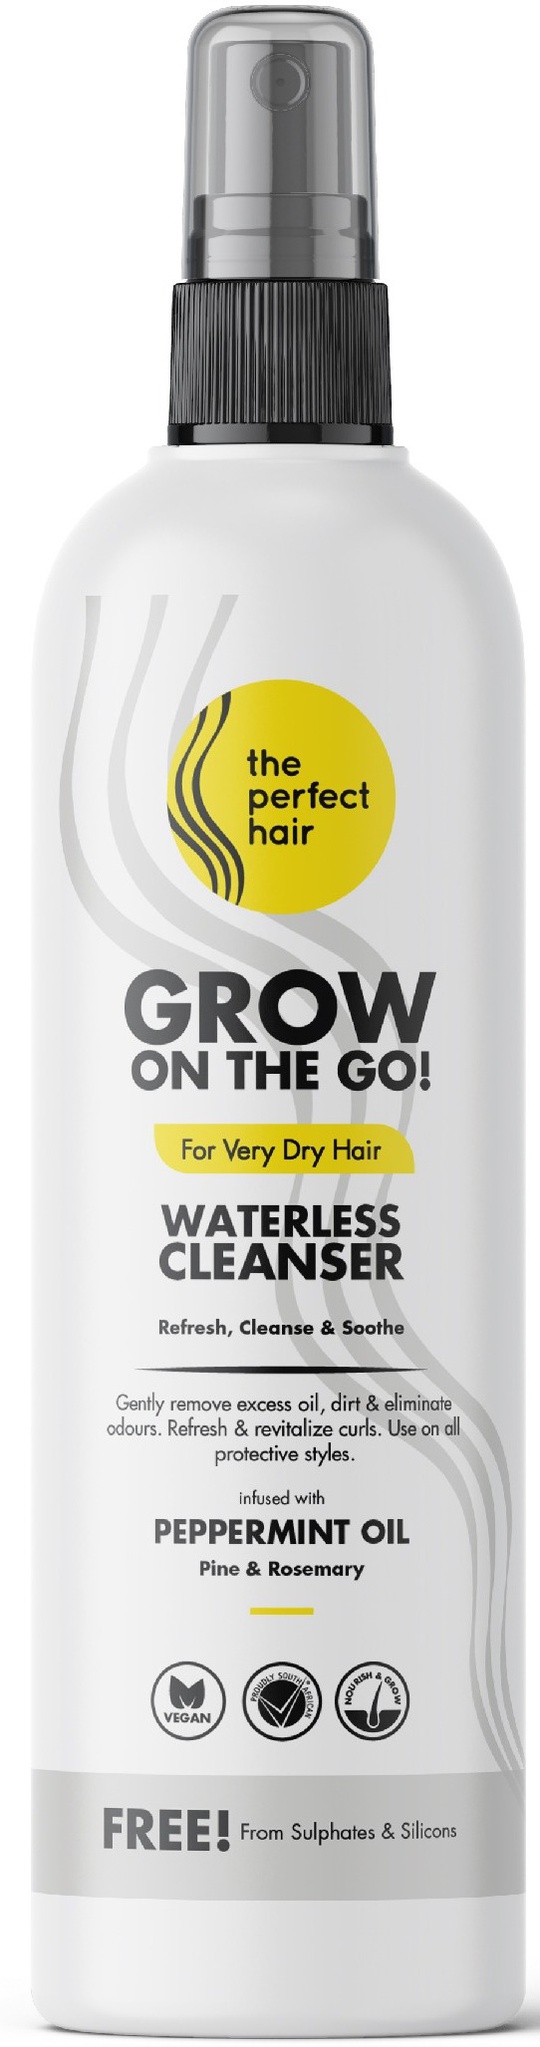 The perfect hair Grow On The Go! Waterless Cleanser